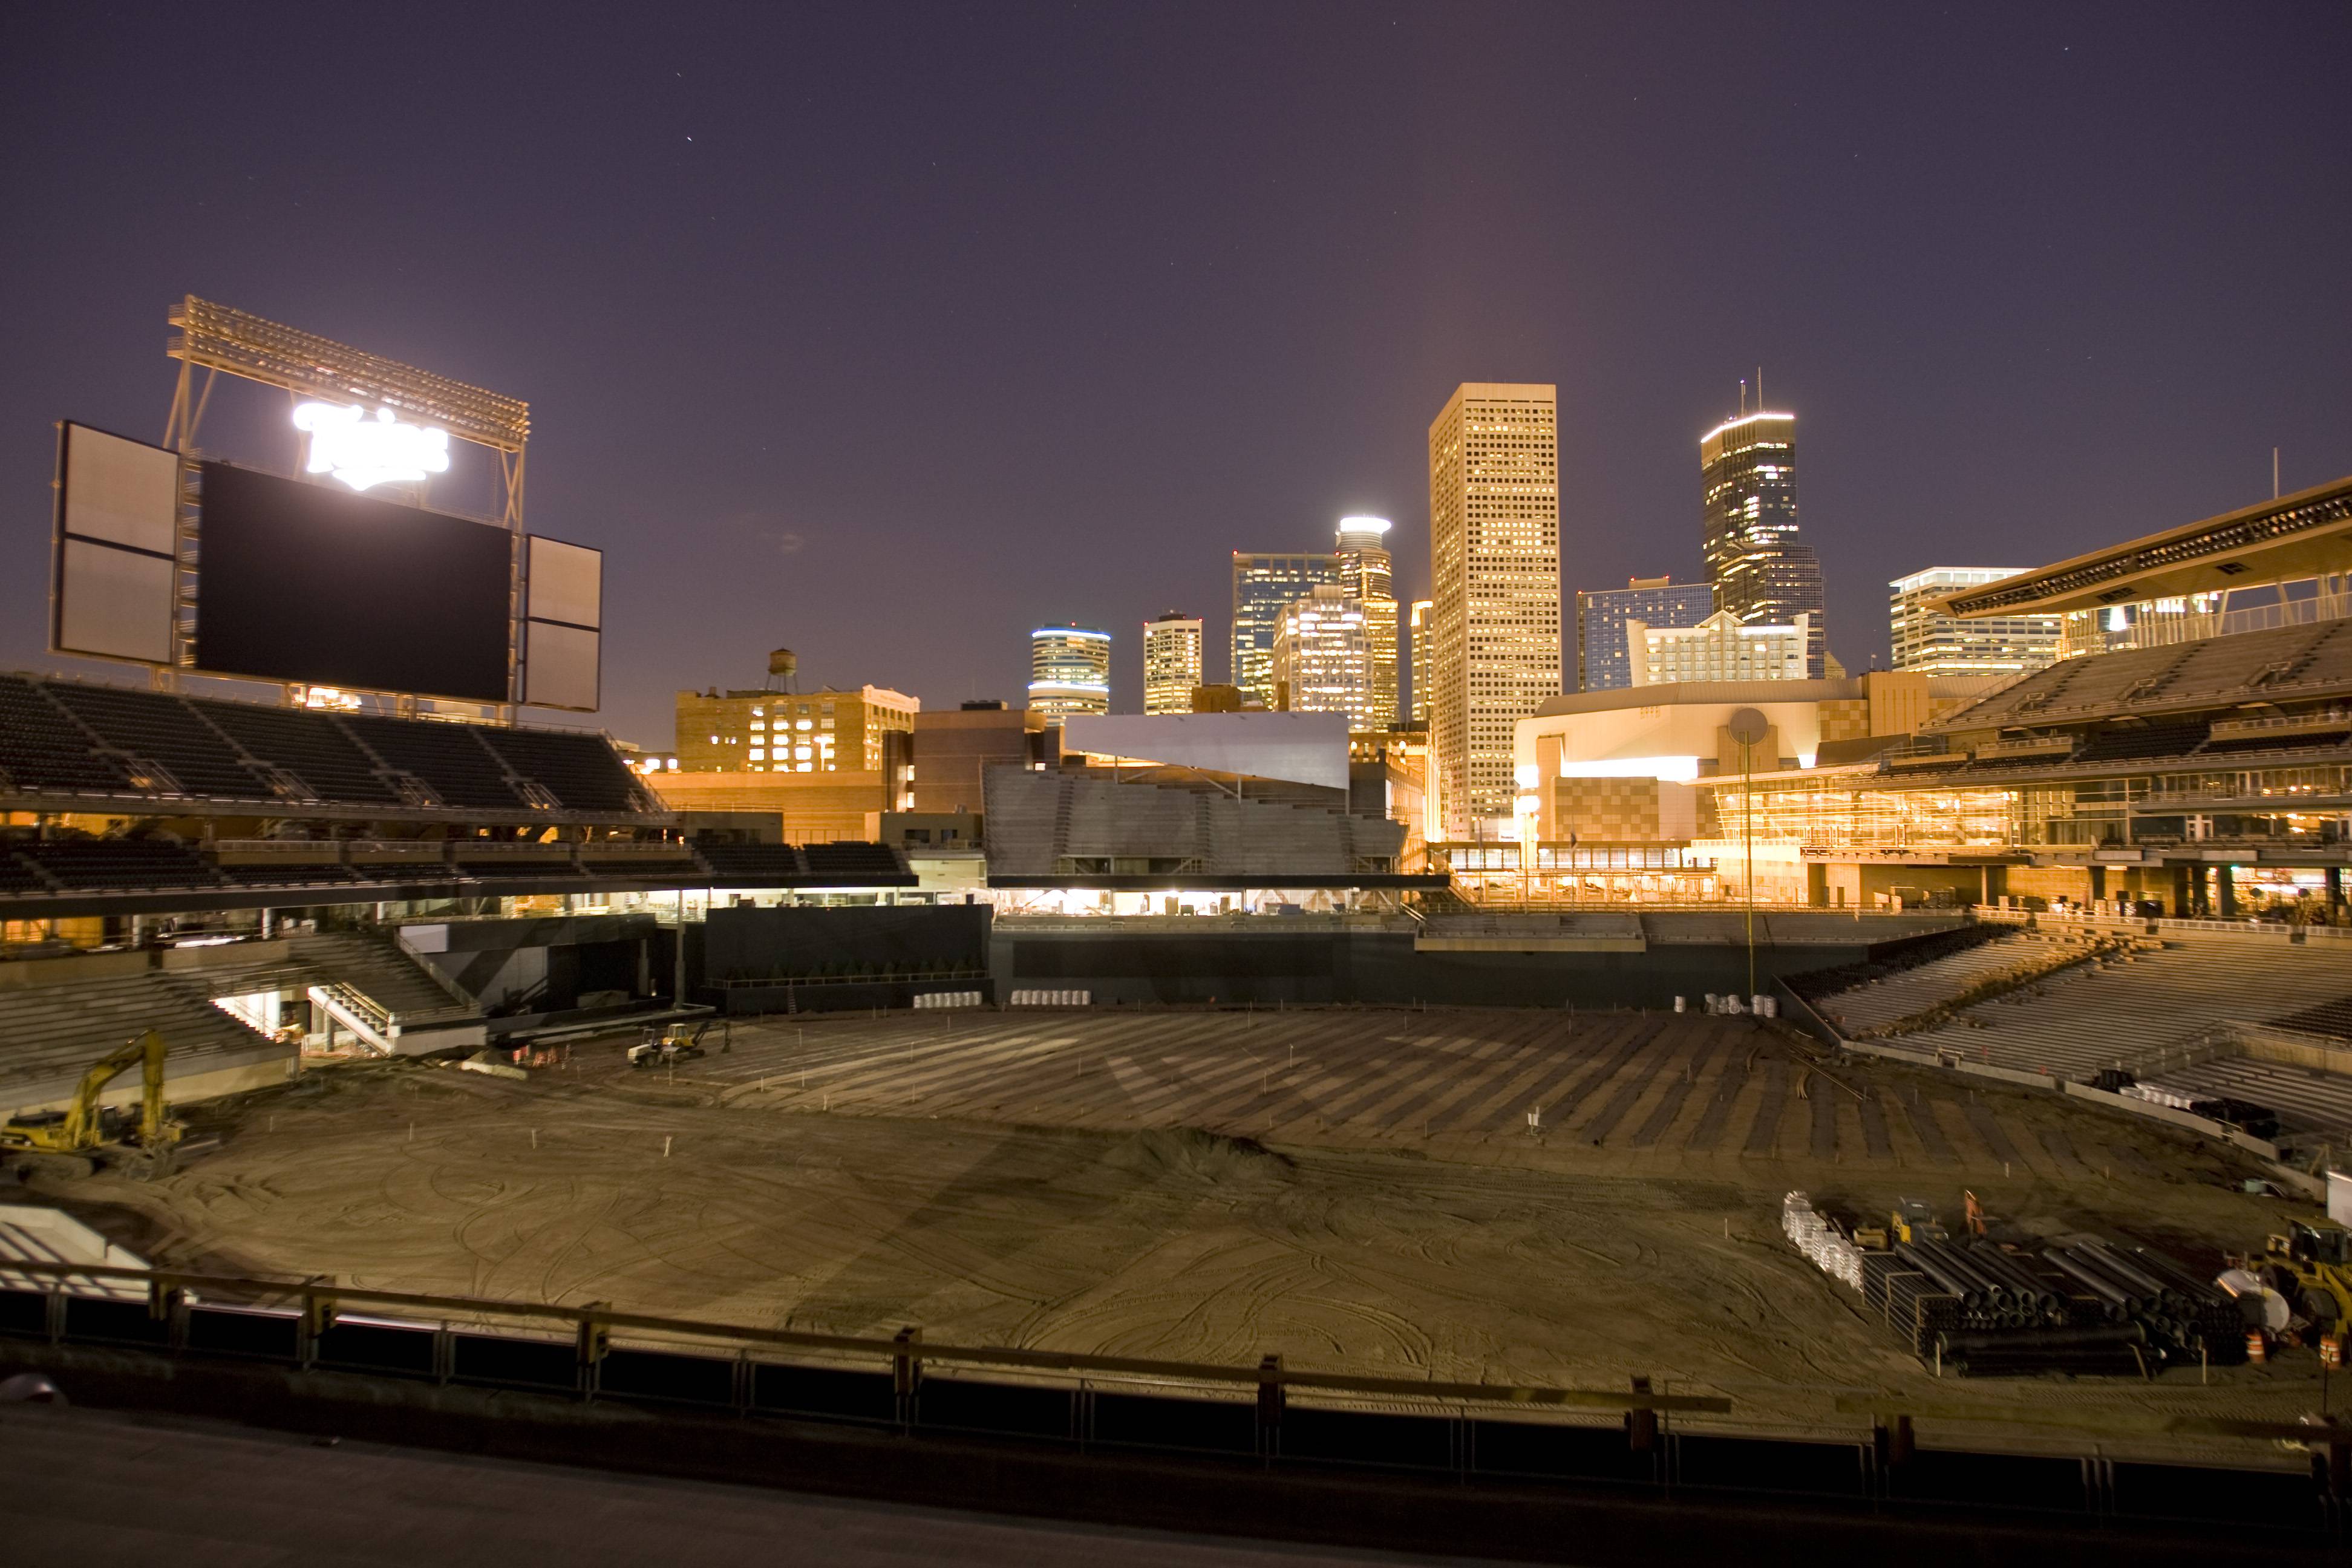 Check out these cool photo of Target Field in Minneapolis